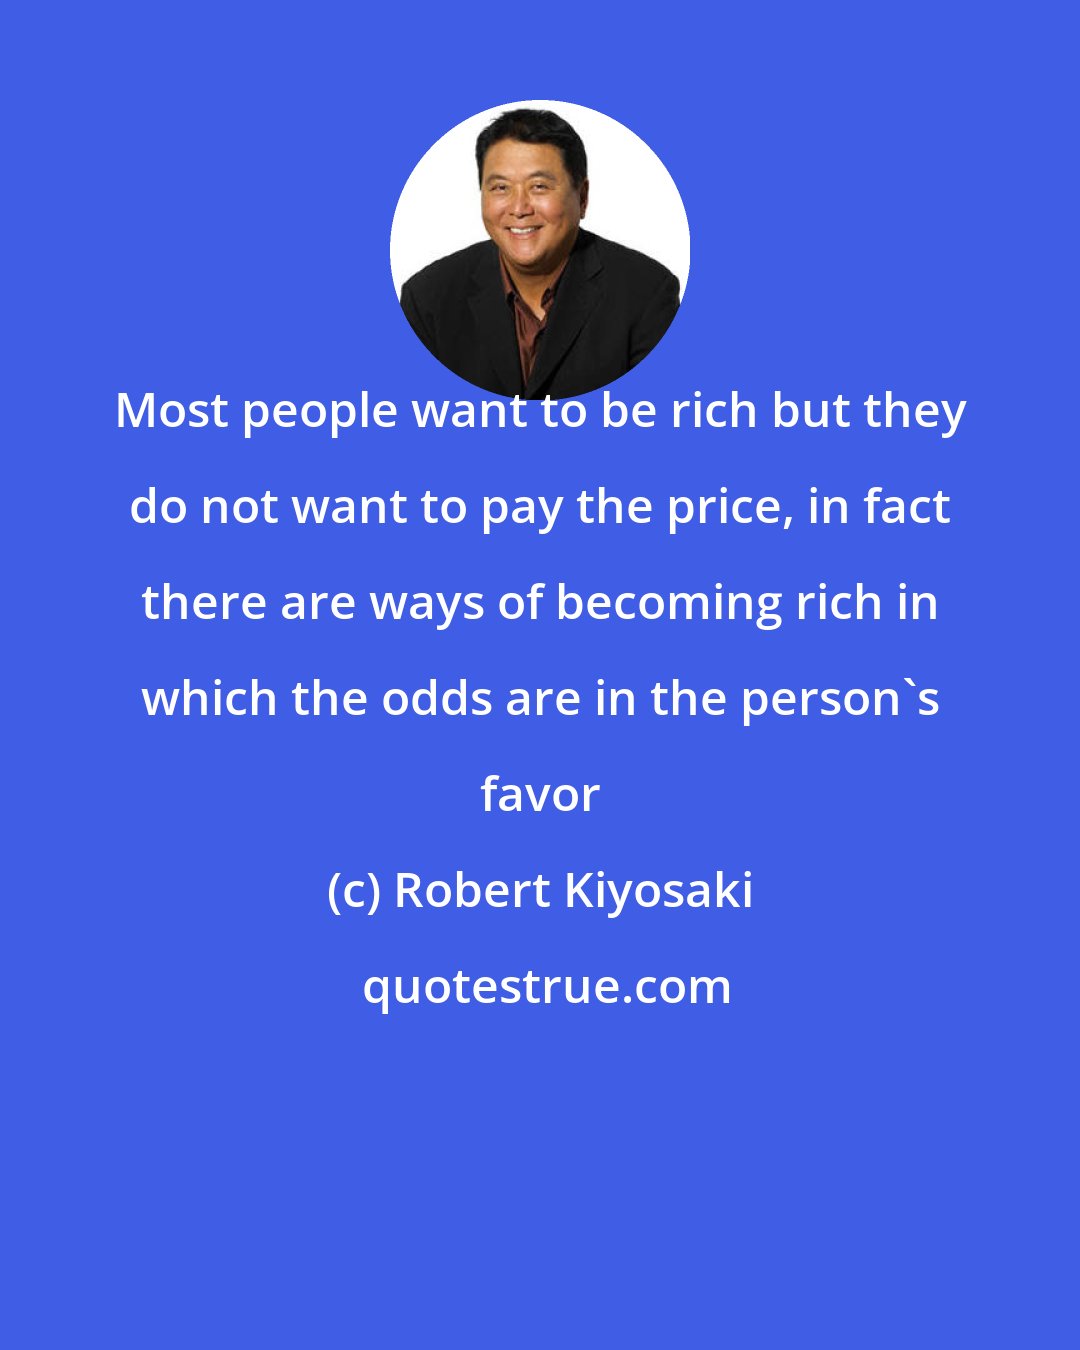 Robert Kiyosaki: Most people want to be rich but they do not want to pay the price, in fact there are ways of becoming rich in which the odds are in the person's favor